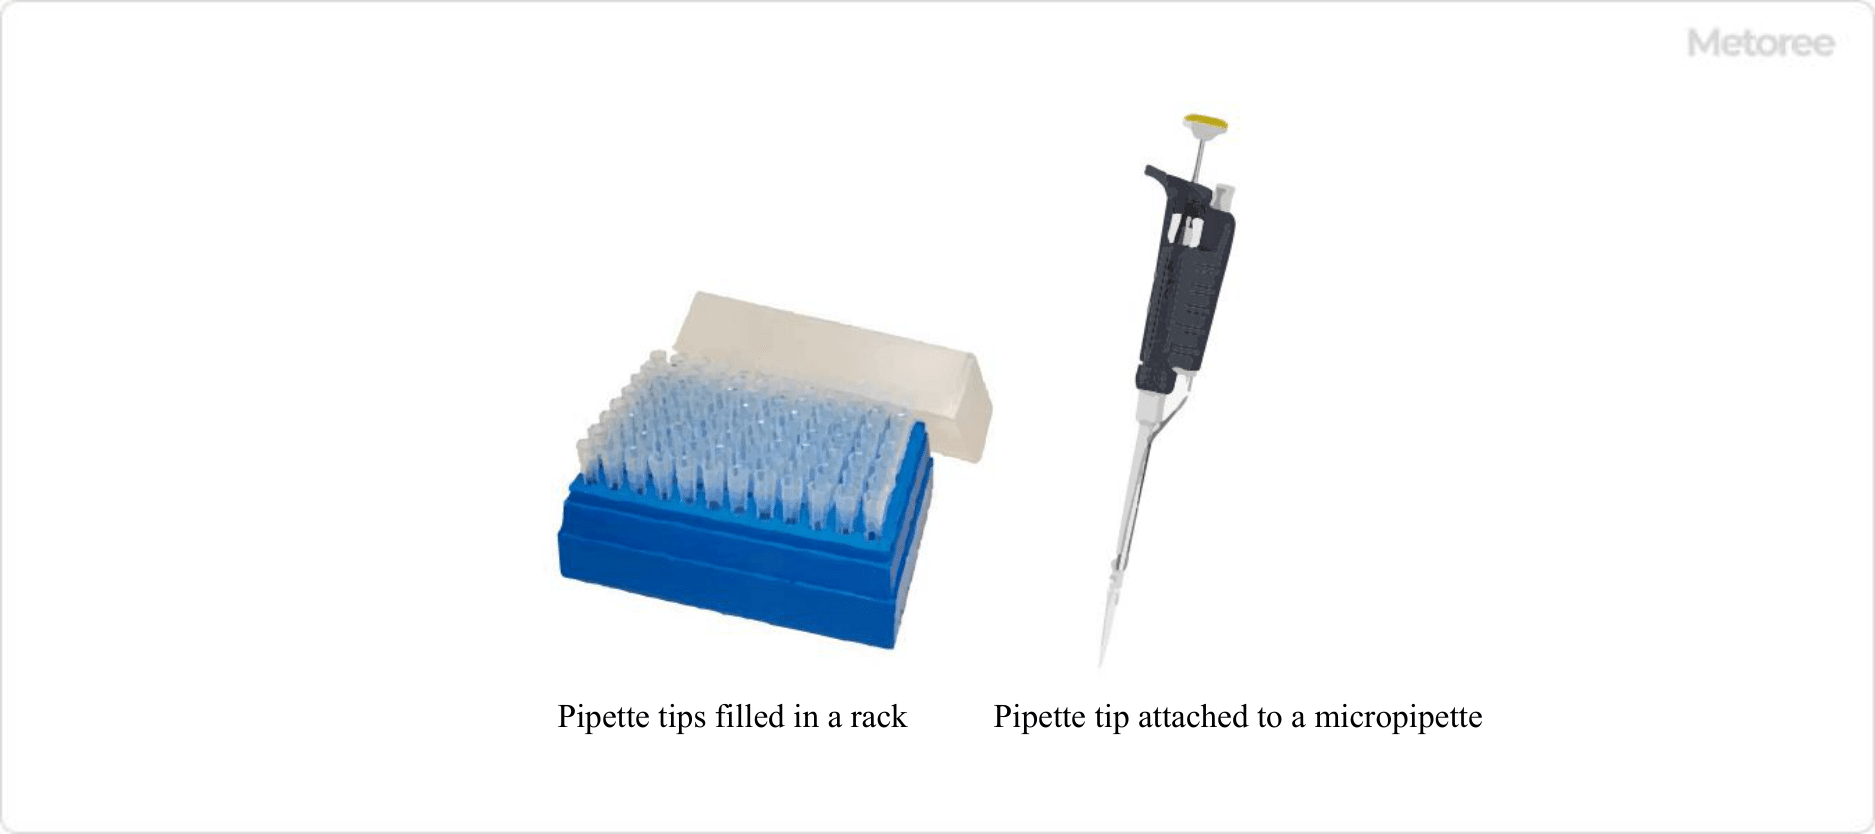 Figure 1. Image of pipette tip